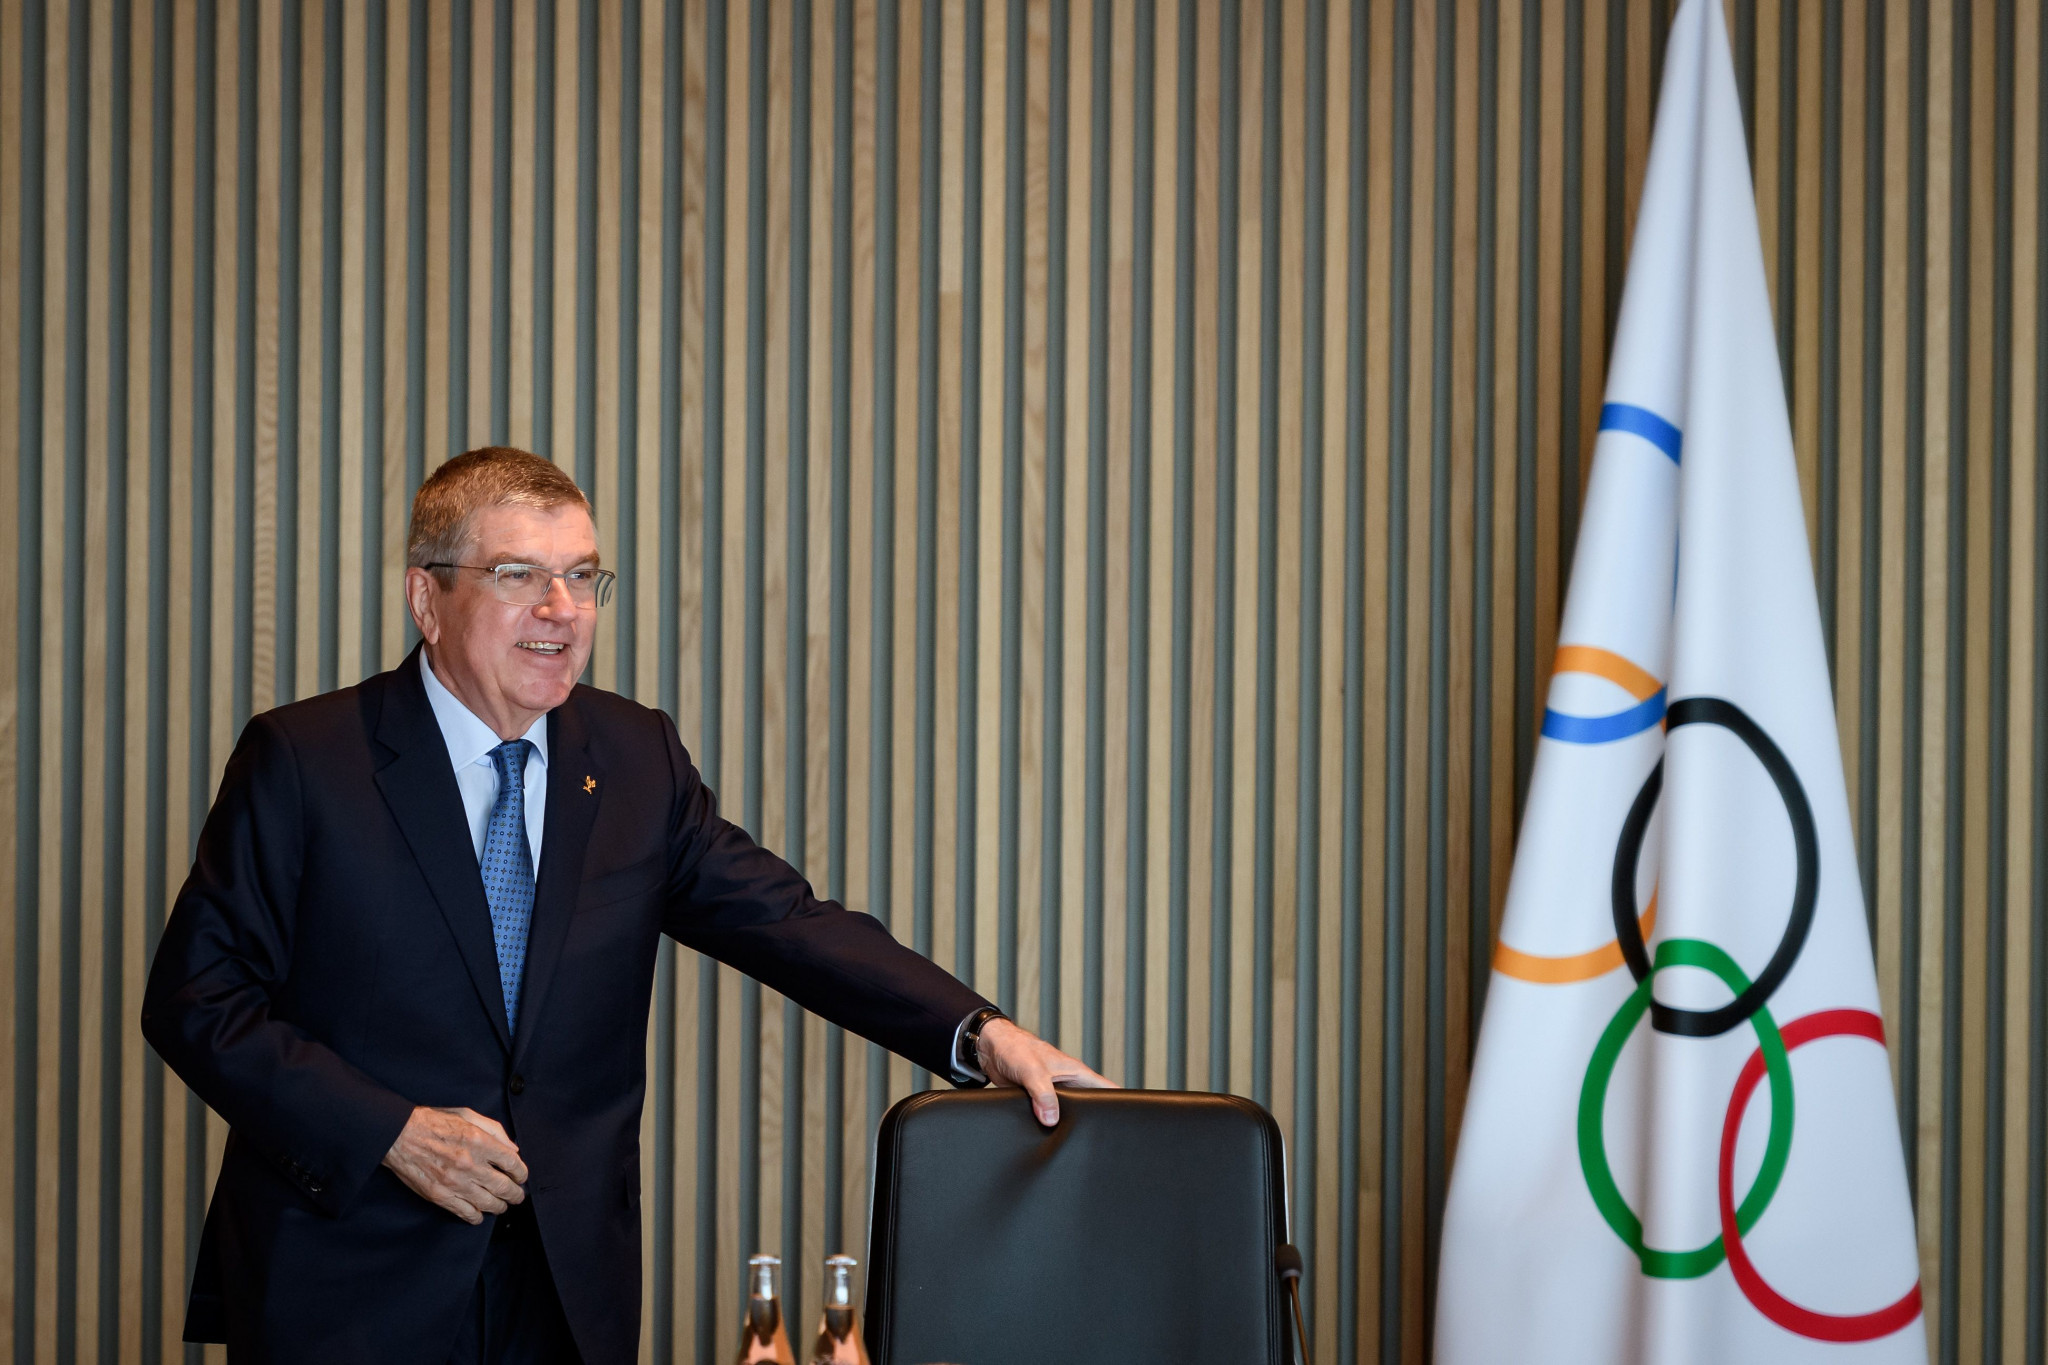 IOC President Thomas Bach fielded numerous questions from the media on the coronavirus outbreak ©Getty Images